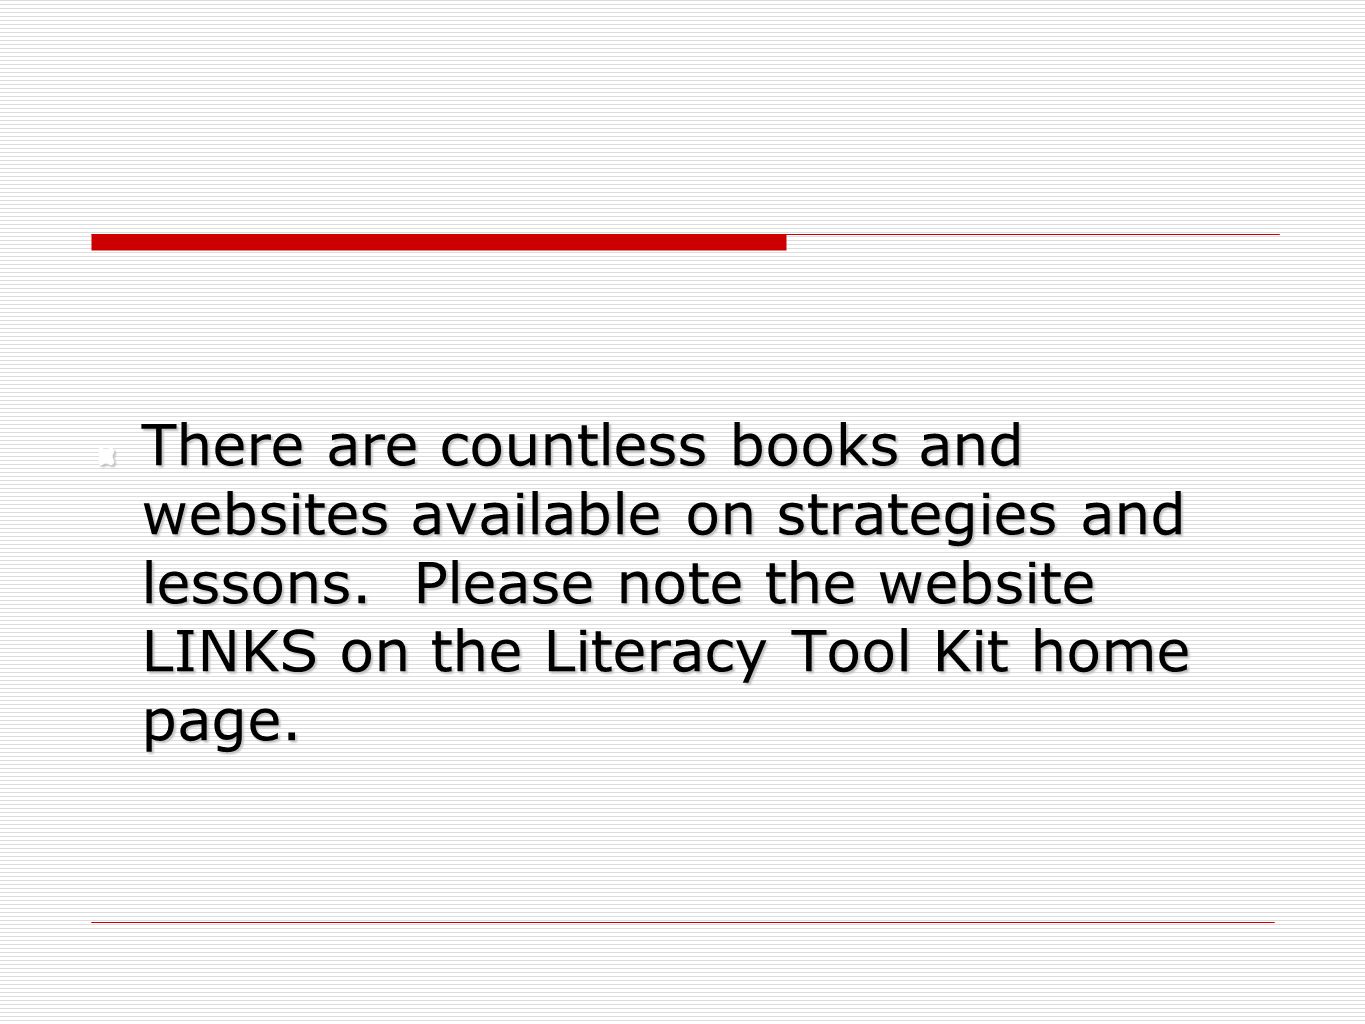 There are countless books and websites available on strategies and lessons.